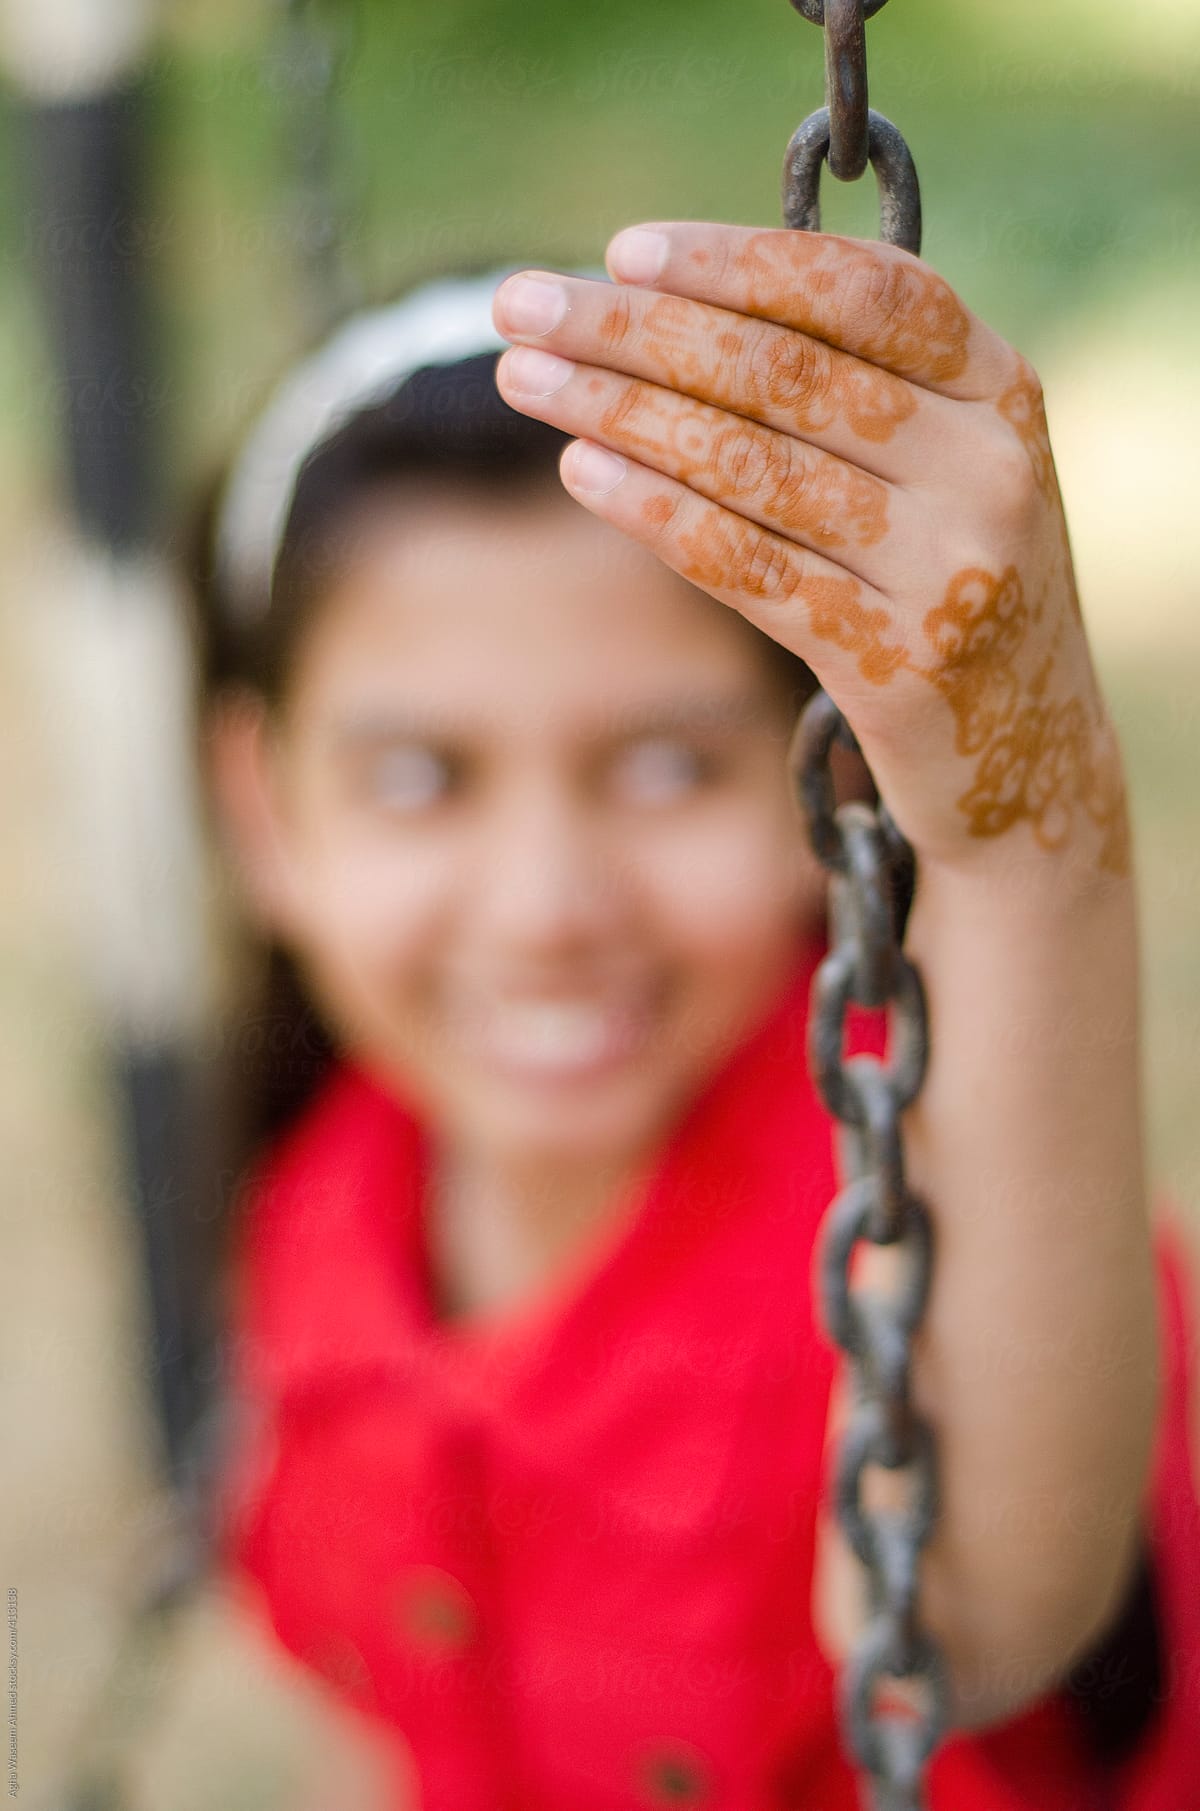 An adolescent girl holding chain of a swing with her henna painted hand